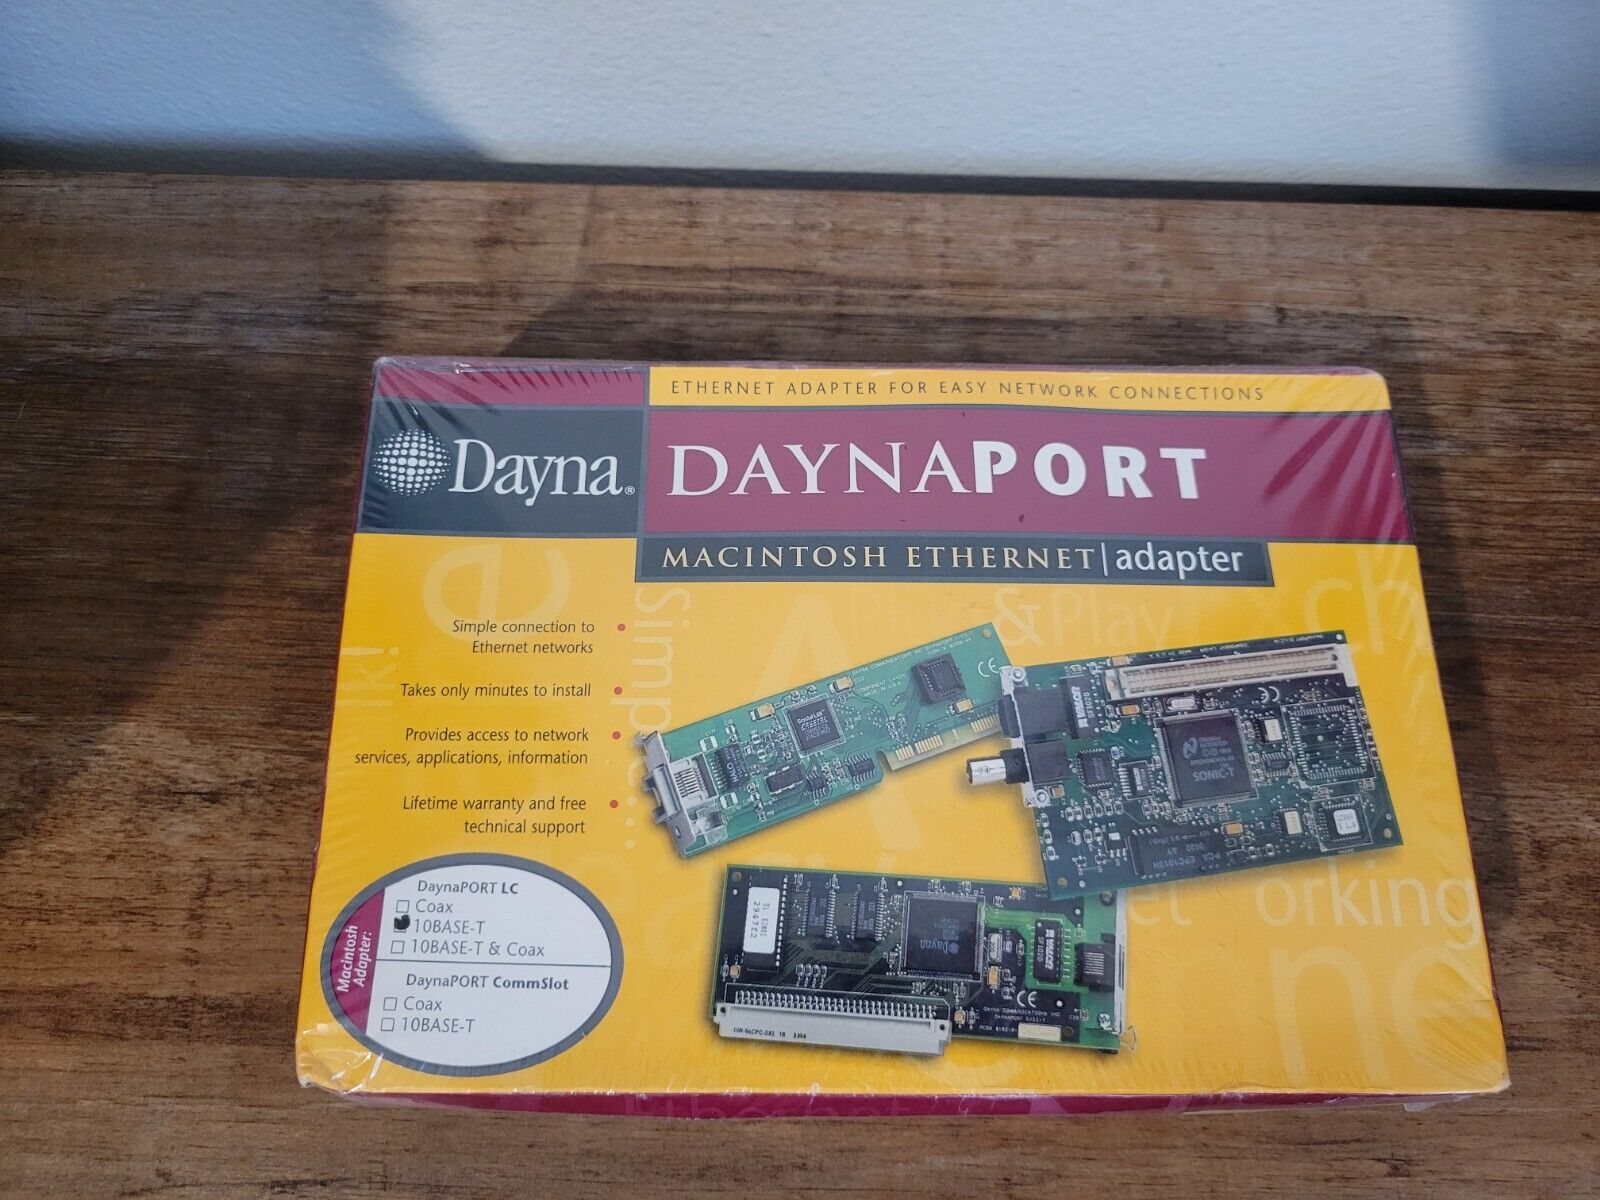 Dayna DaynaPort Macintosh Ethernet Adapter For Easy Network Connections.10BASE-T